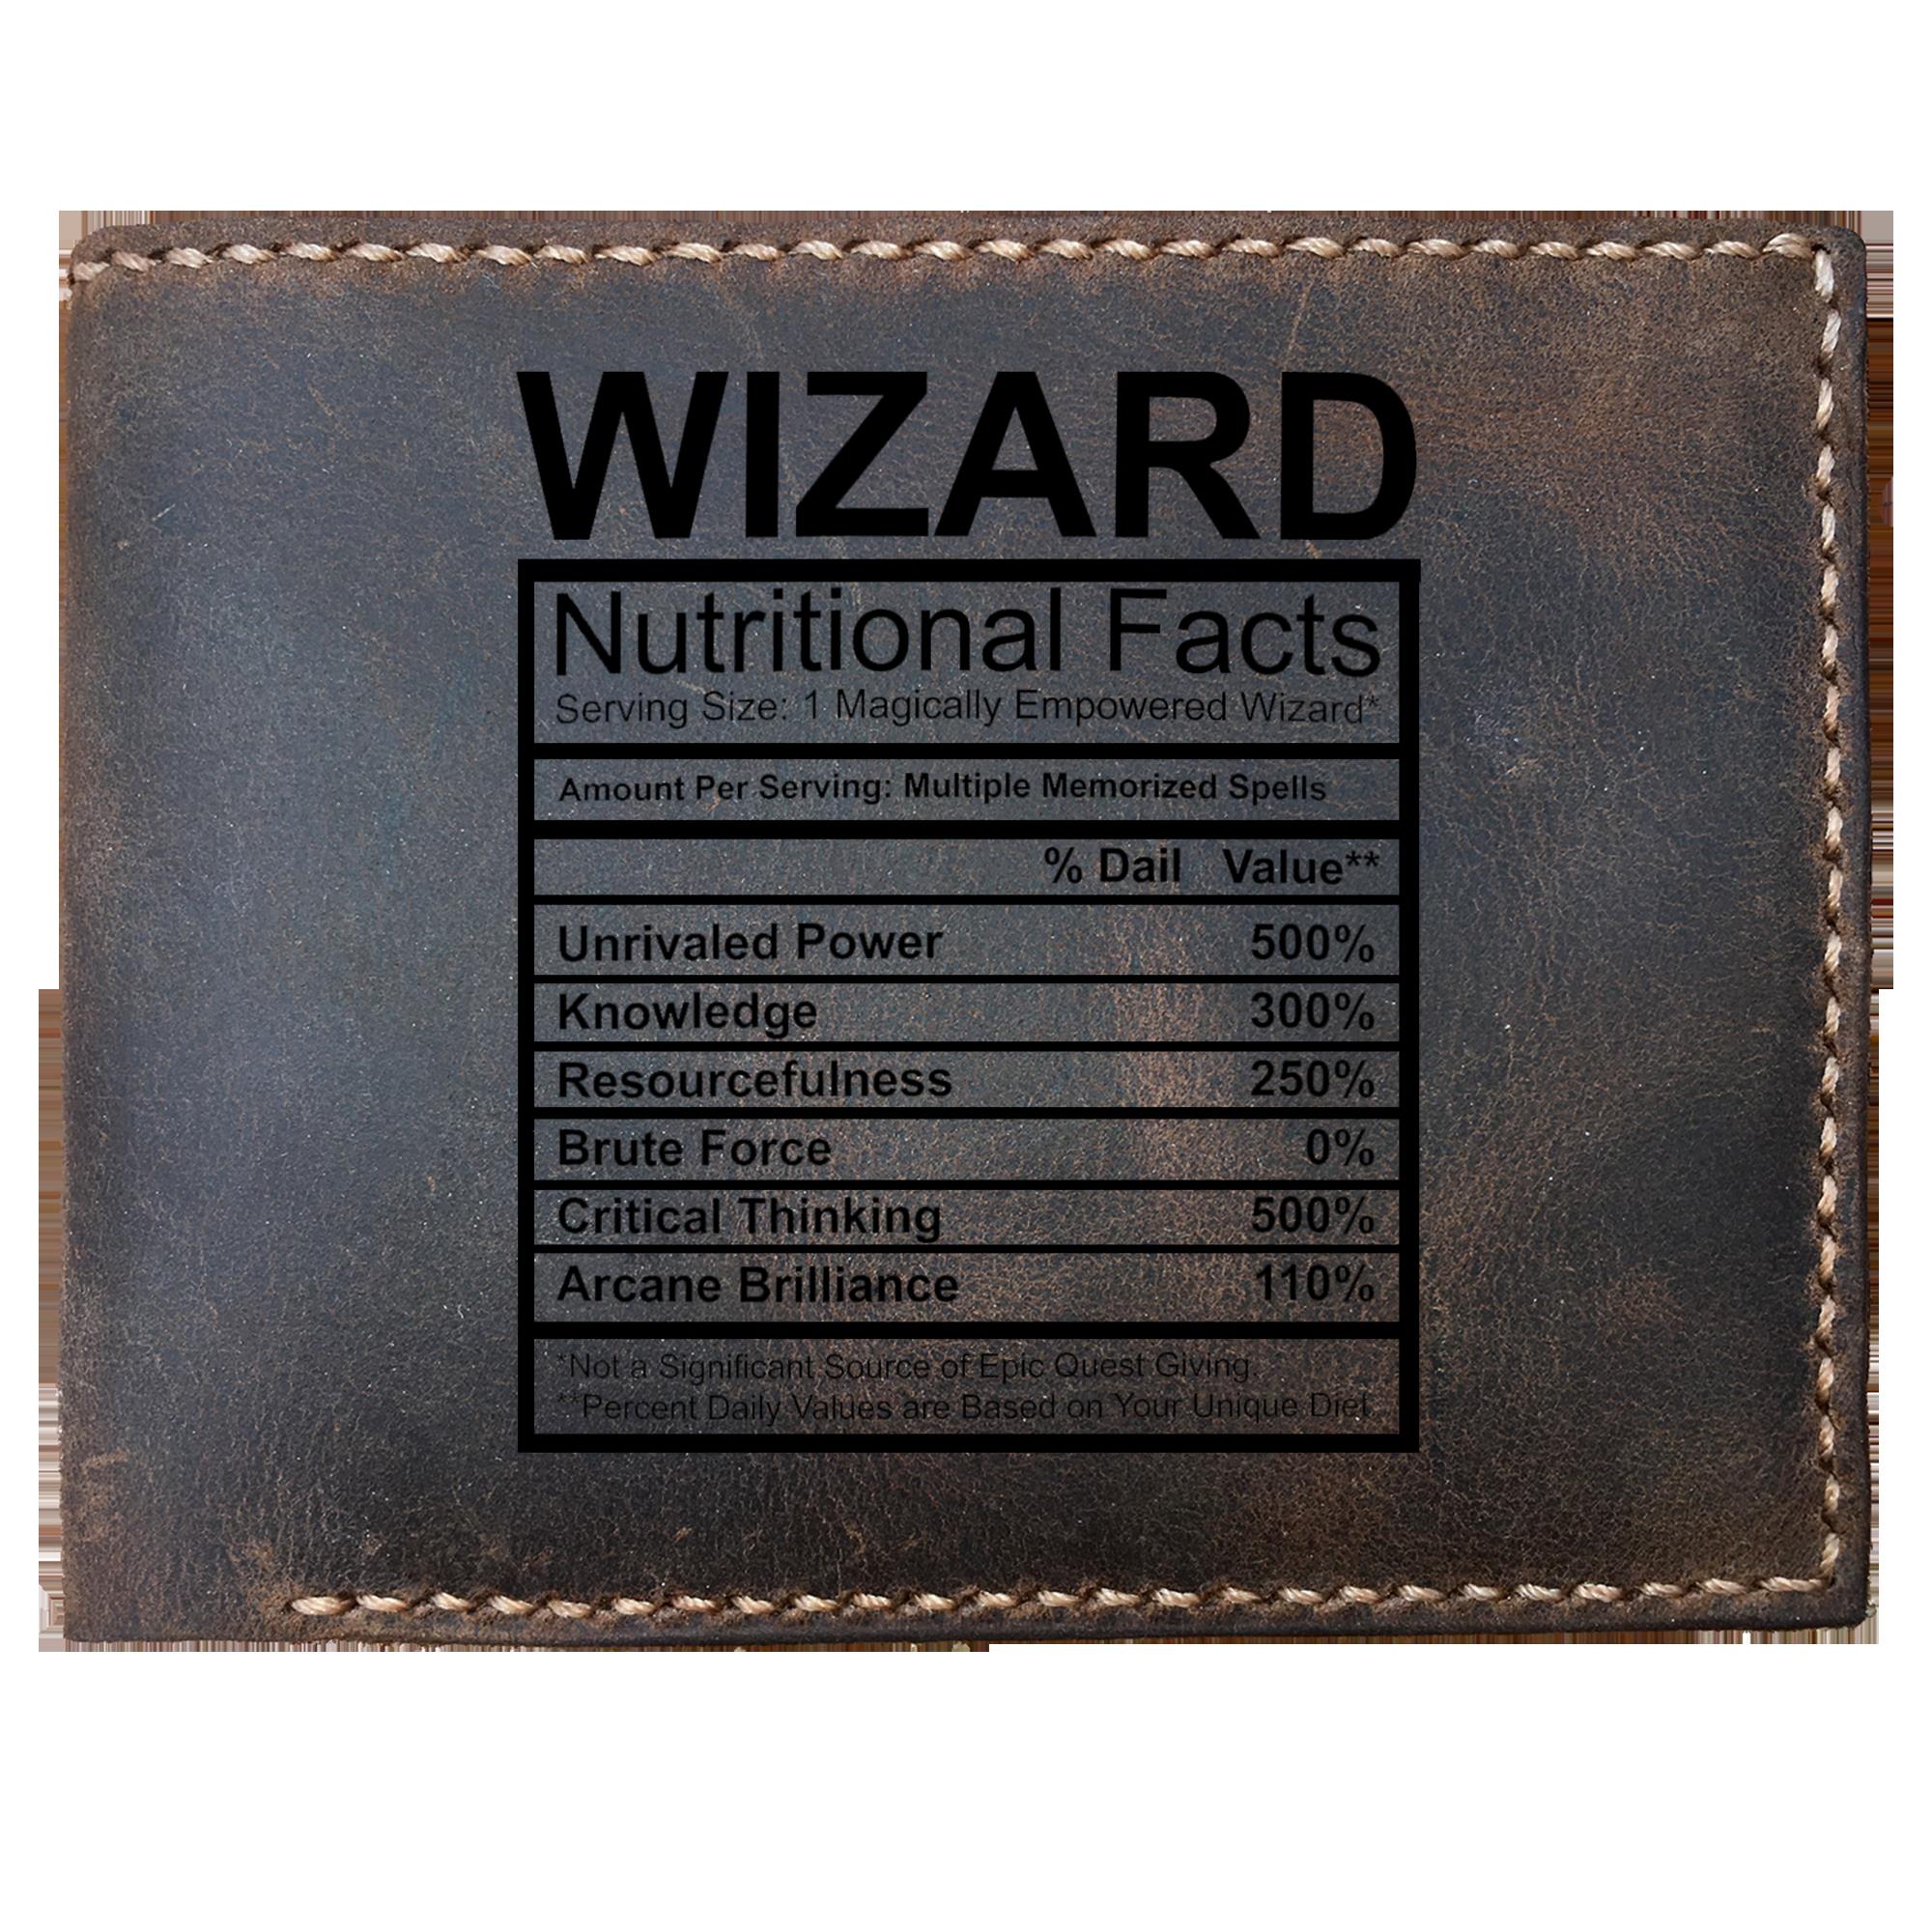 Skitongifts Funny Custom Laser Engraved Bifold Leather Wallet For Men, Wizard Nutritional Facts